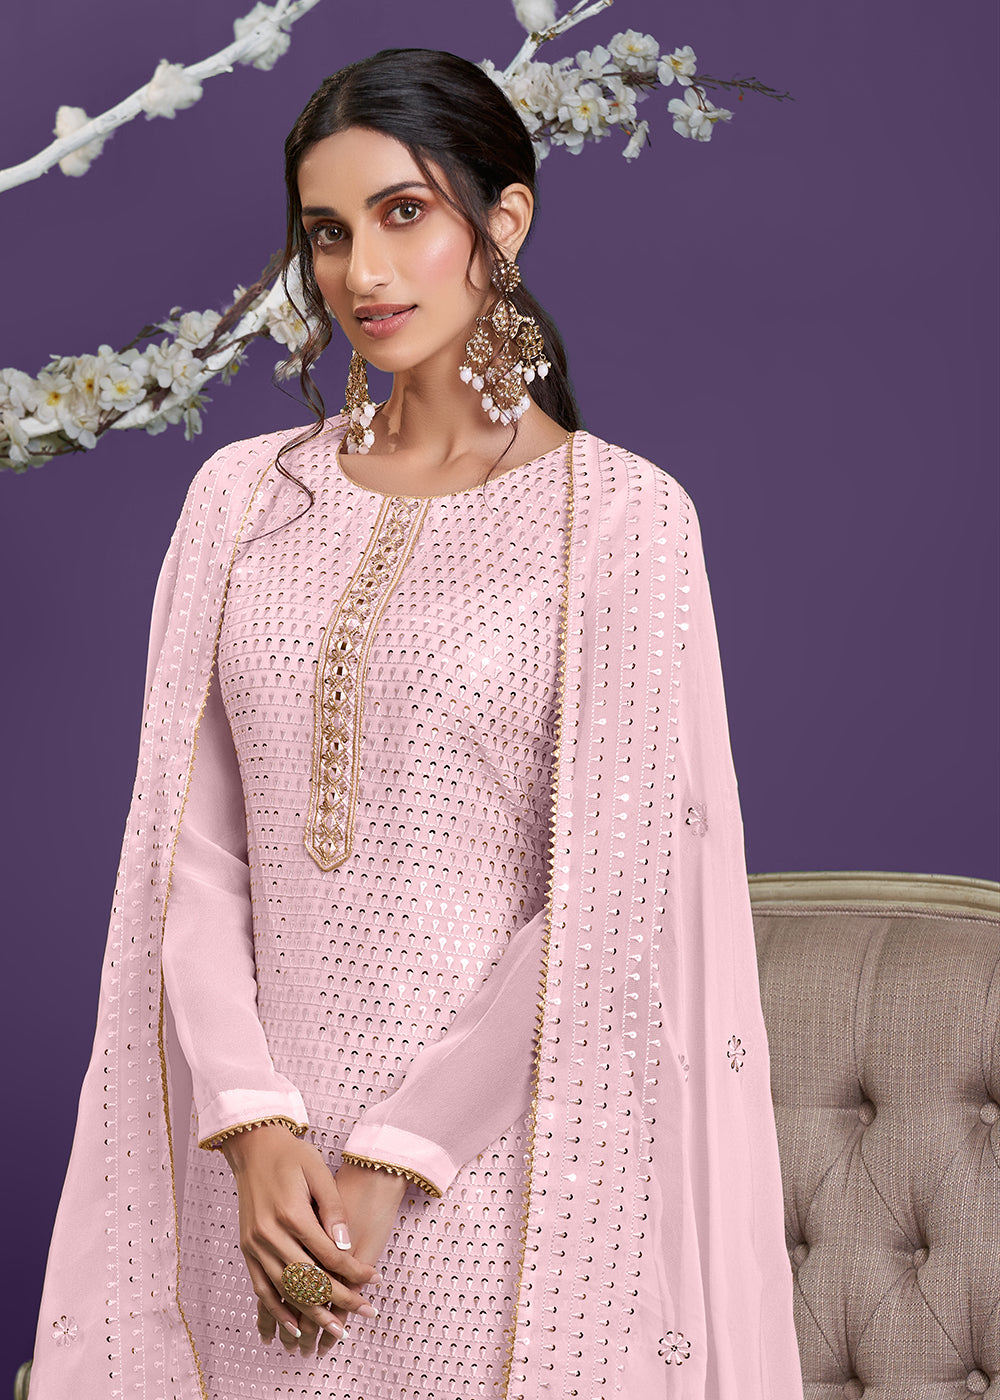 Shop Now Barbie Pink Khatli Work Embroidered Georgette Sharara Suit Online at Empress Clothing in USA, UK, Canada, Germany & Worldwide.